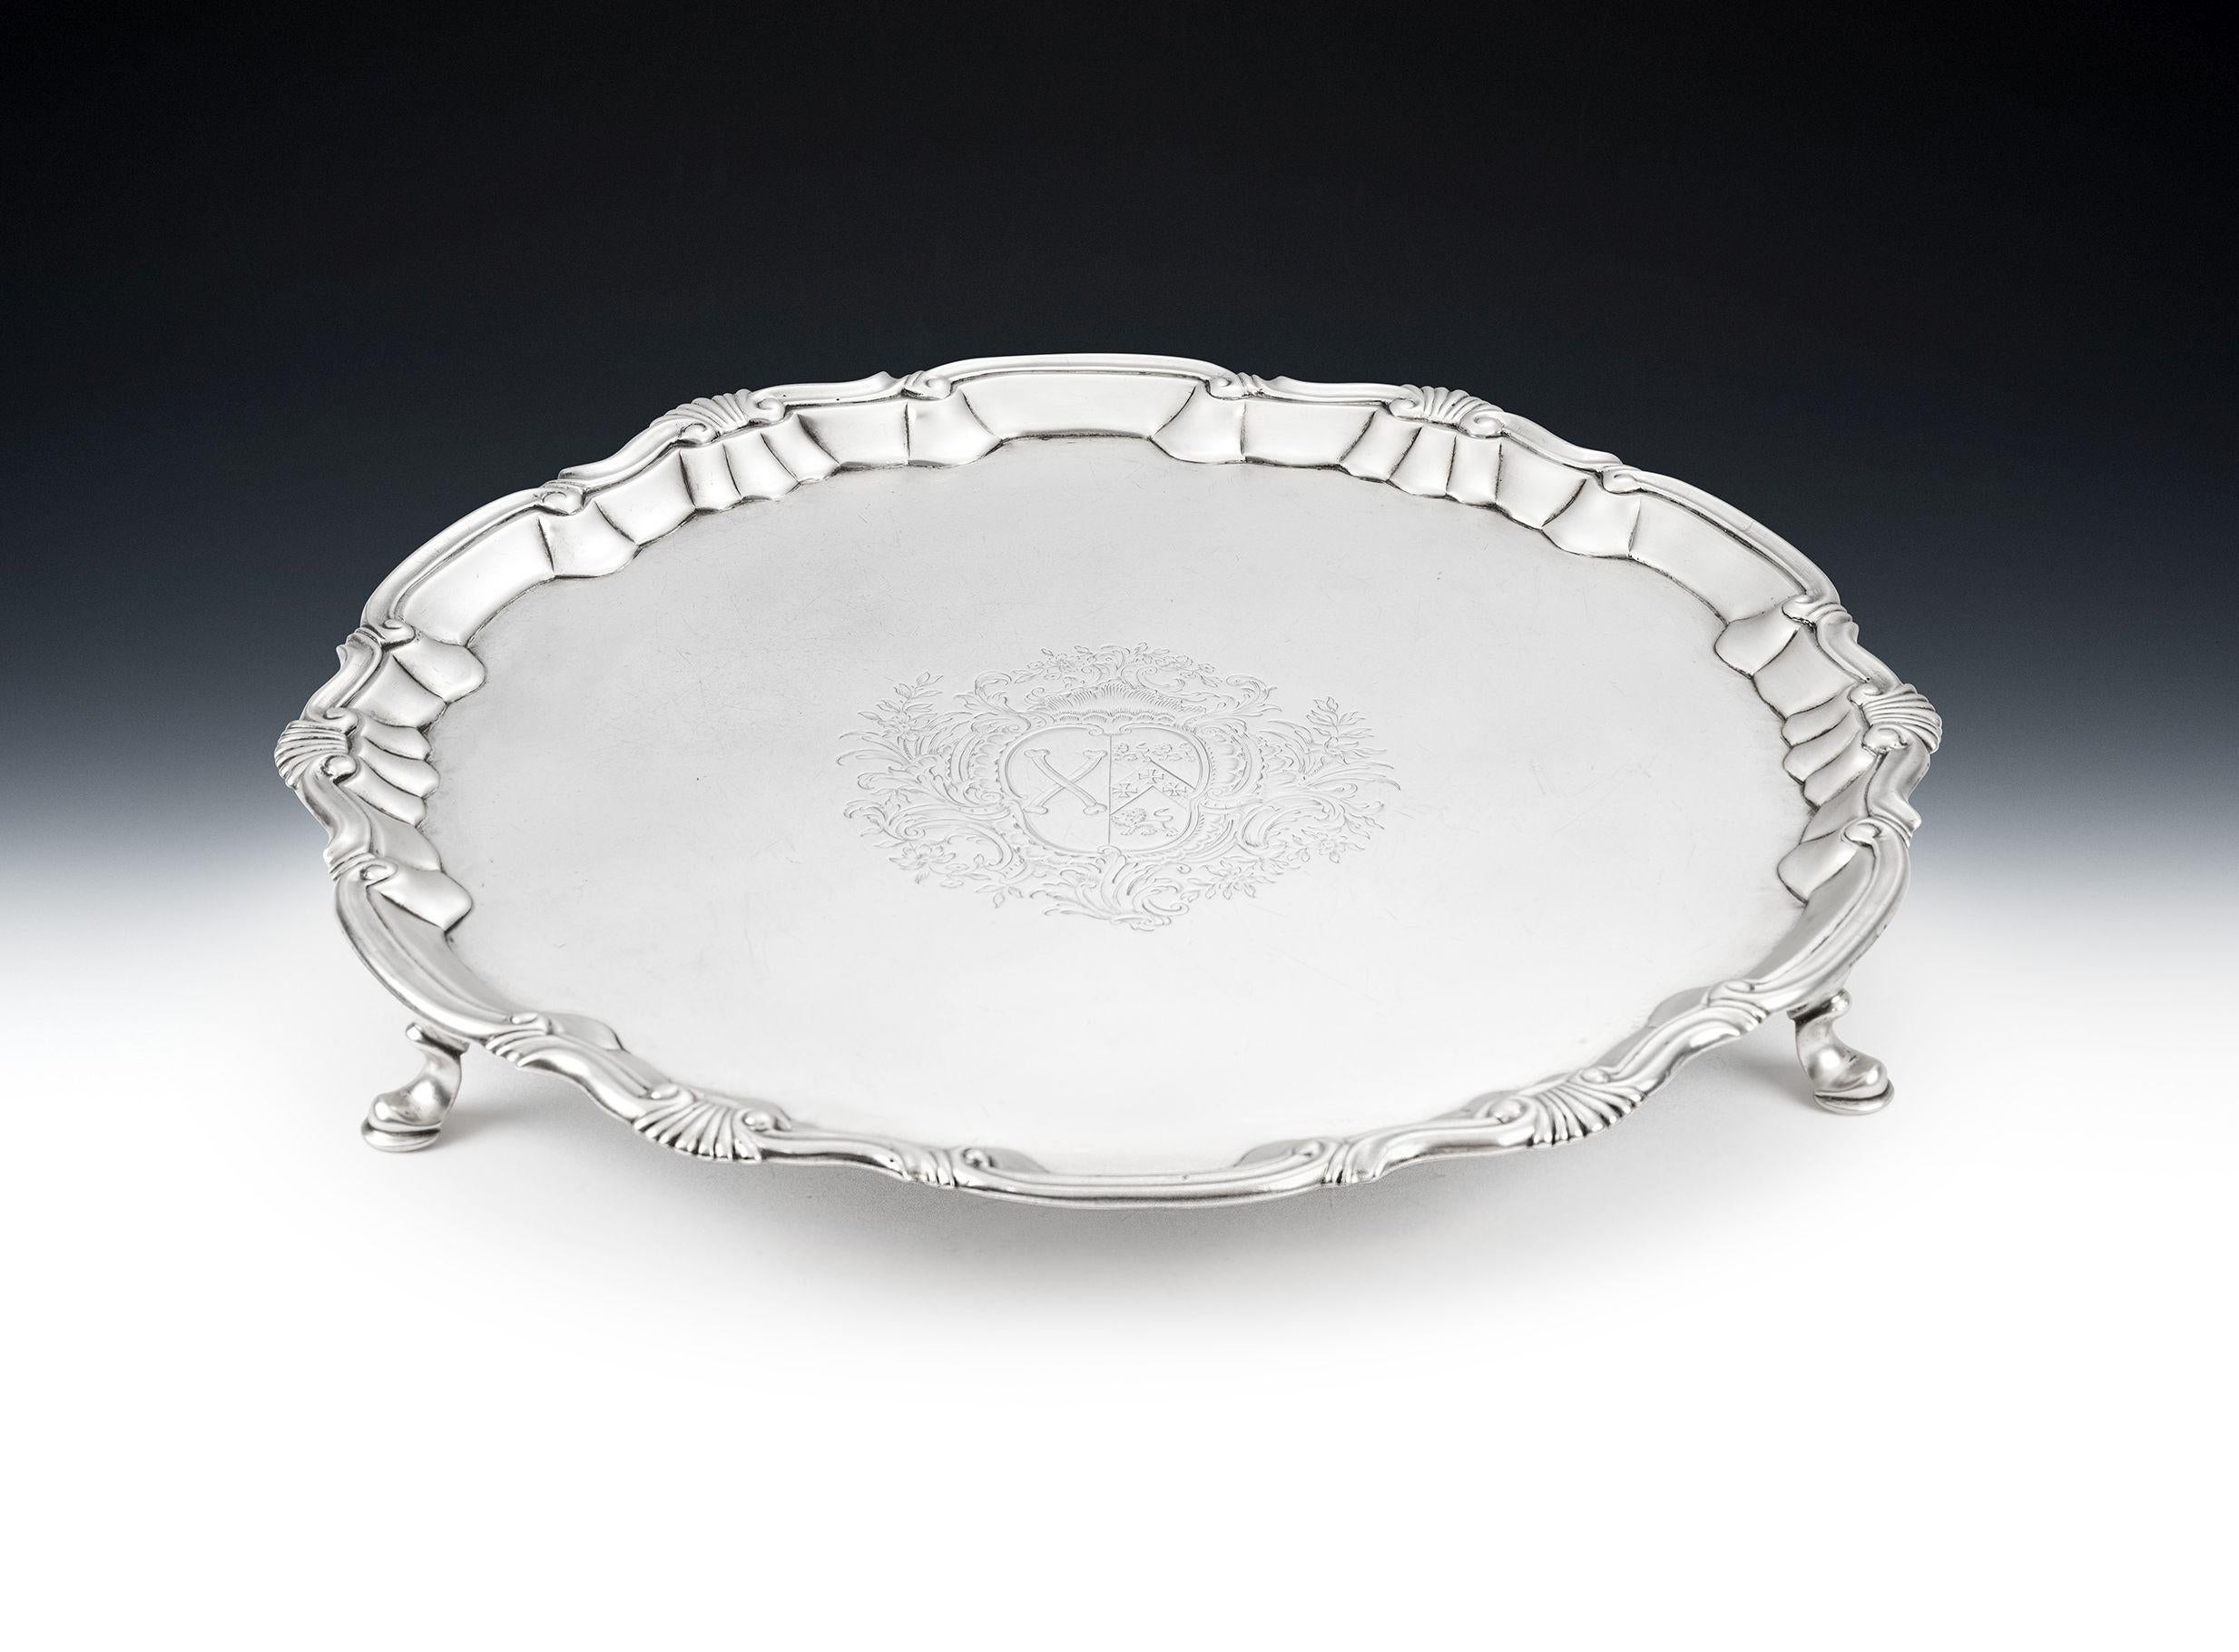 A Very Fine George II Salver Made by William Peaston in London in 1752.

The Salver stands on three cast hoof feet and is circular in form with a raised rim decorated with scrolls and shells, typical of the late George II period.  The centre of the